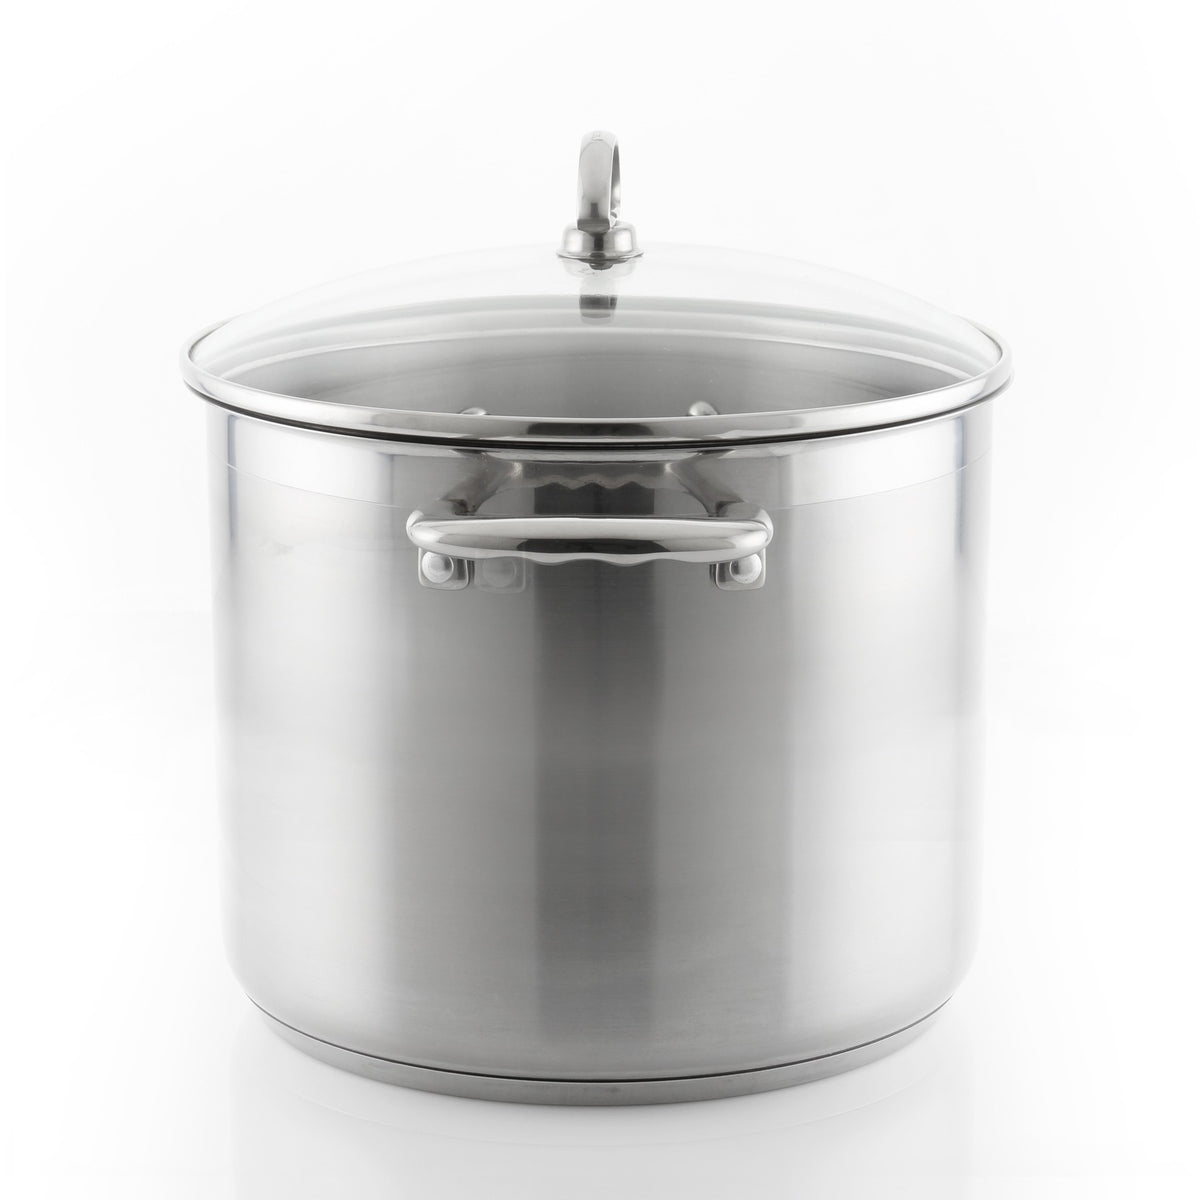 Browne 5723912 12 qt Stainless Steel Stock Pot - Induction Ready